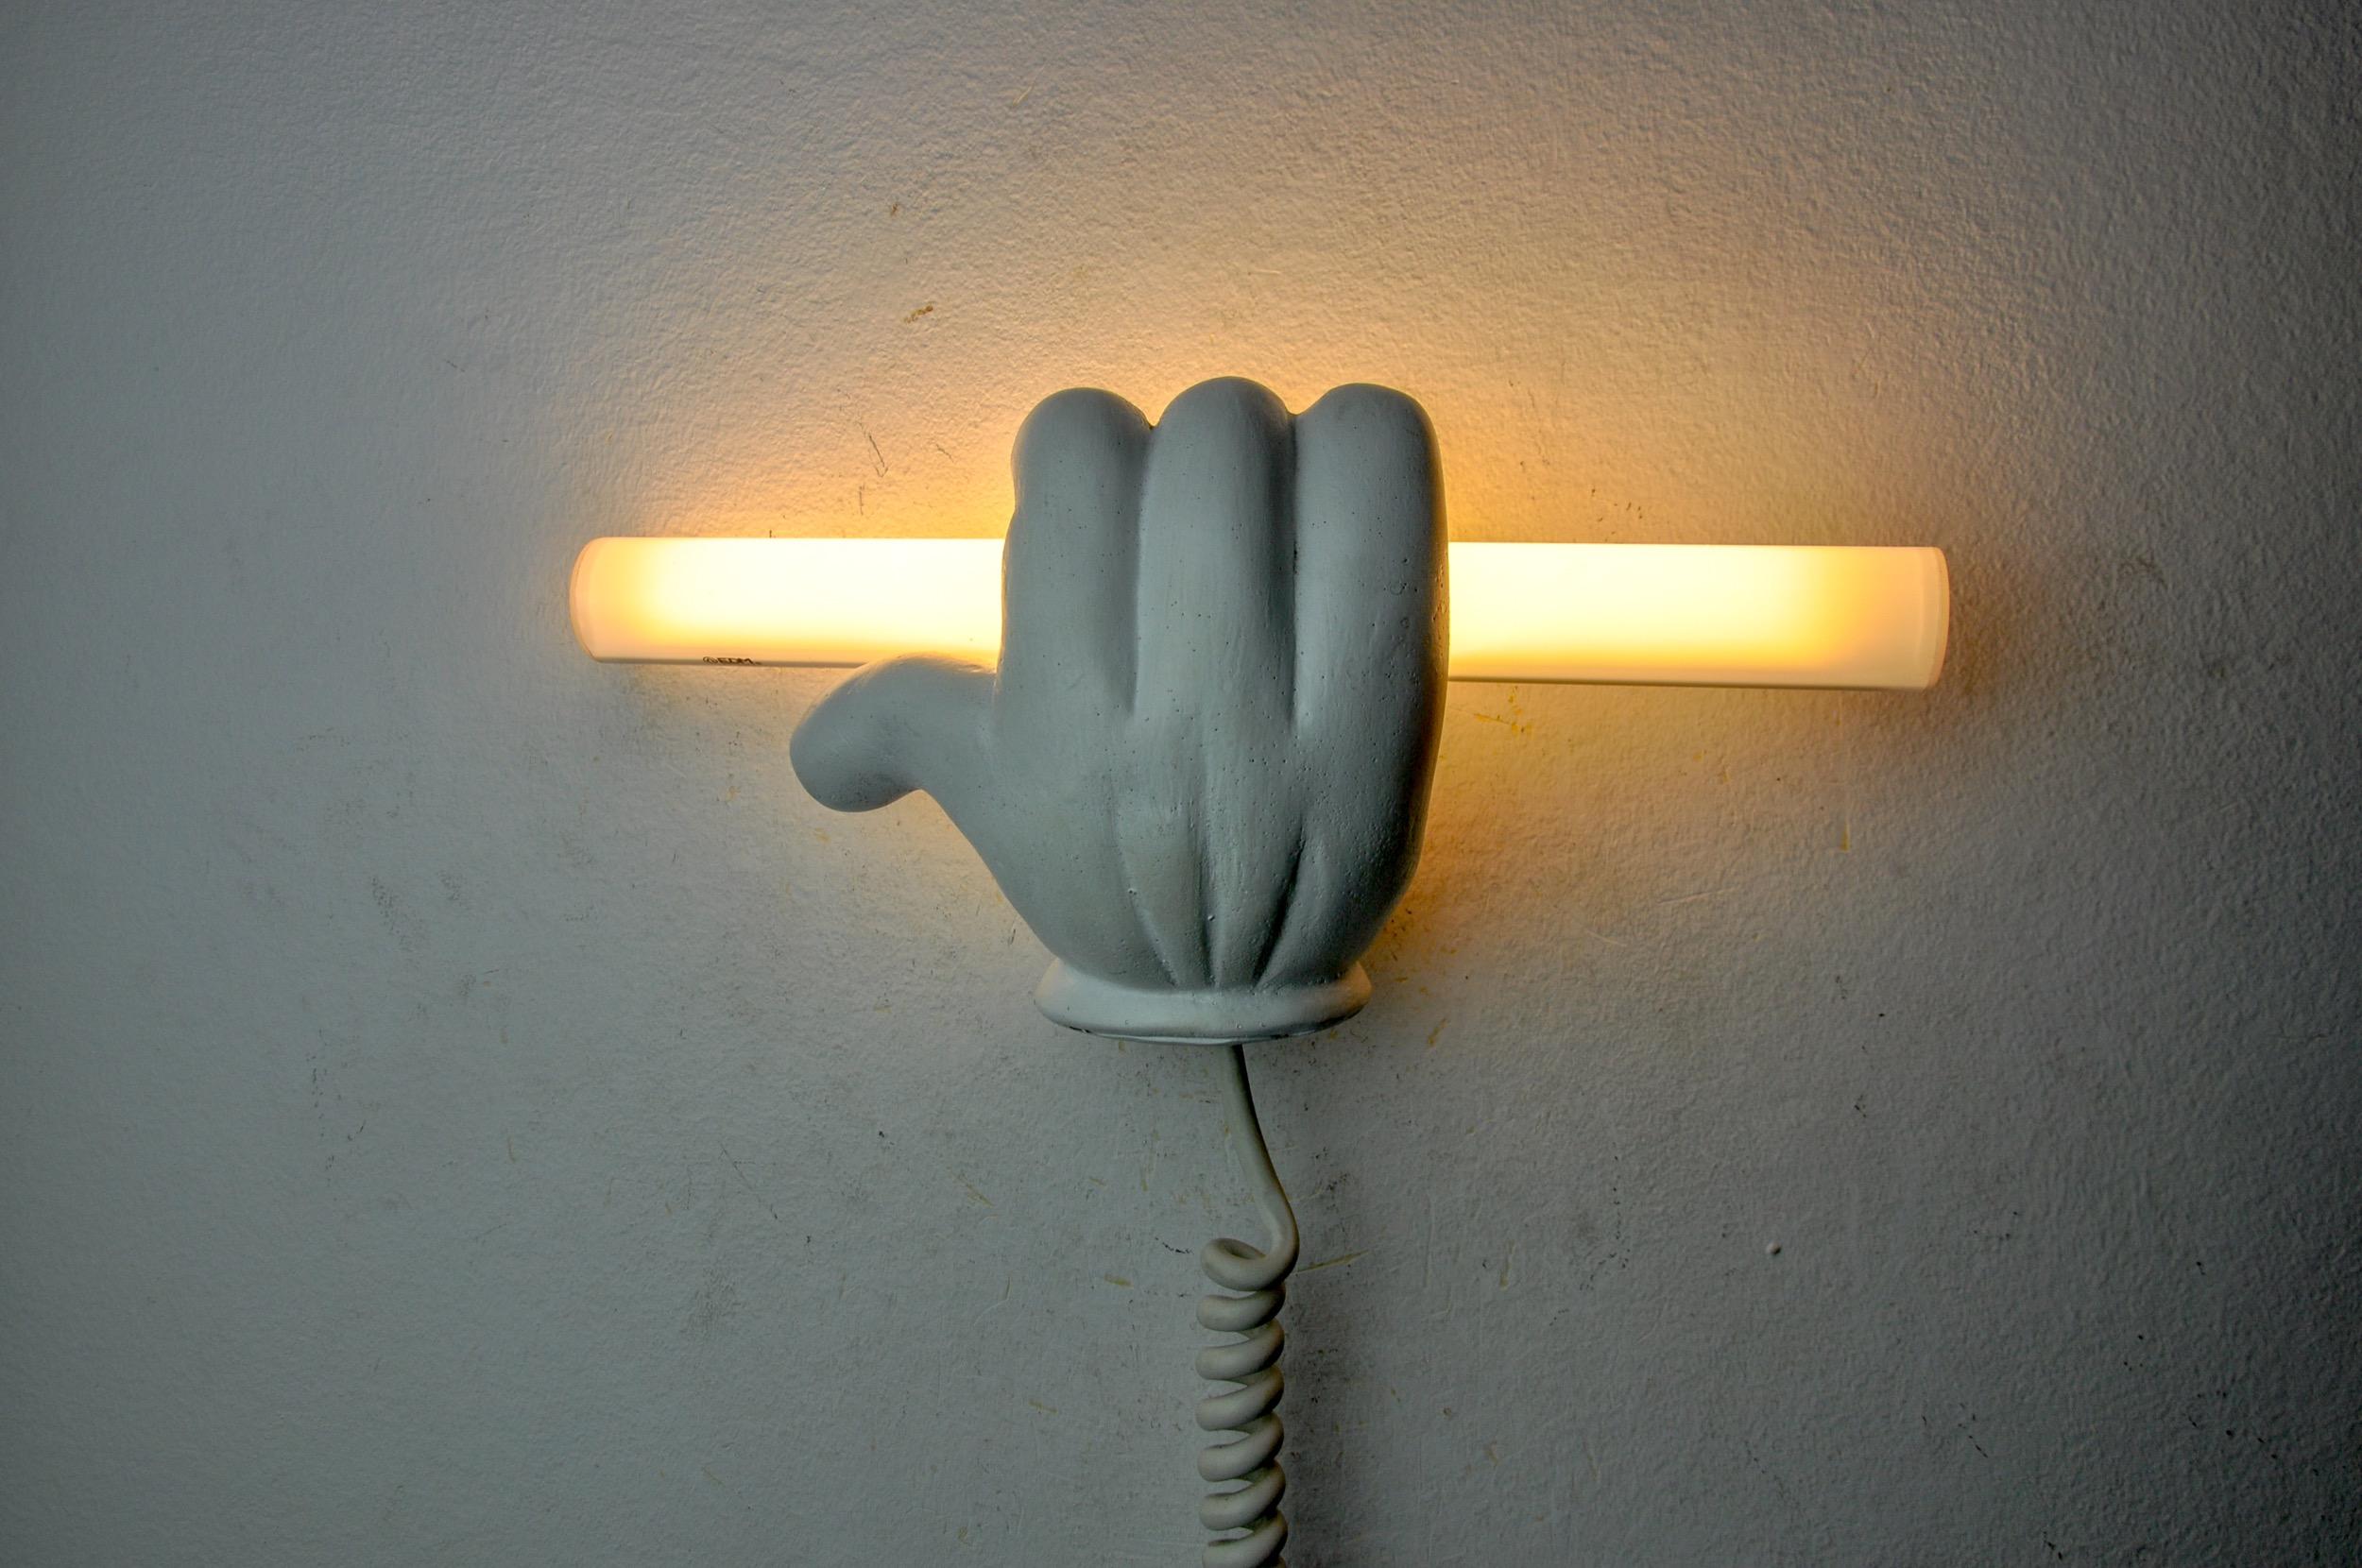 Superb and rare wall lamp representing the hand of mickey mouse, designated and produced in france in the 1970s. Design object in plaster easy to install. A rare piece that will bring a real pop touch to your interior. Electricity checked, good